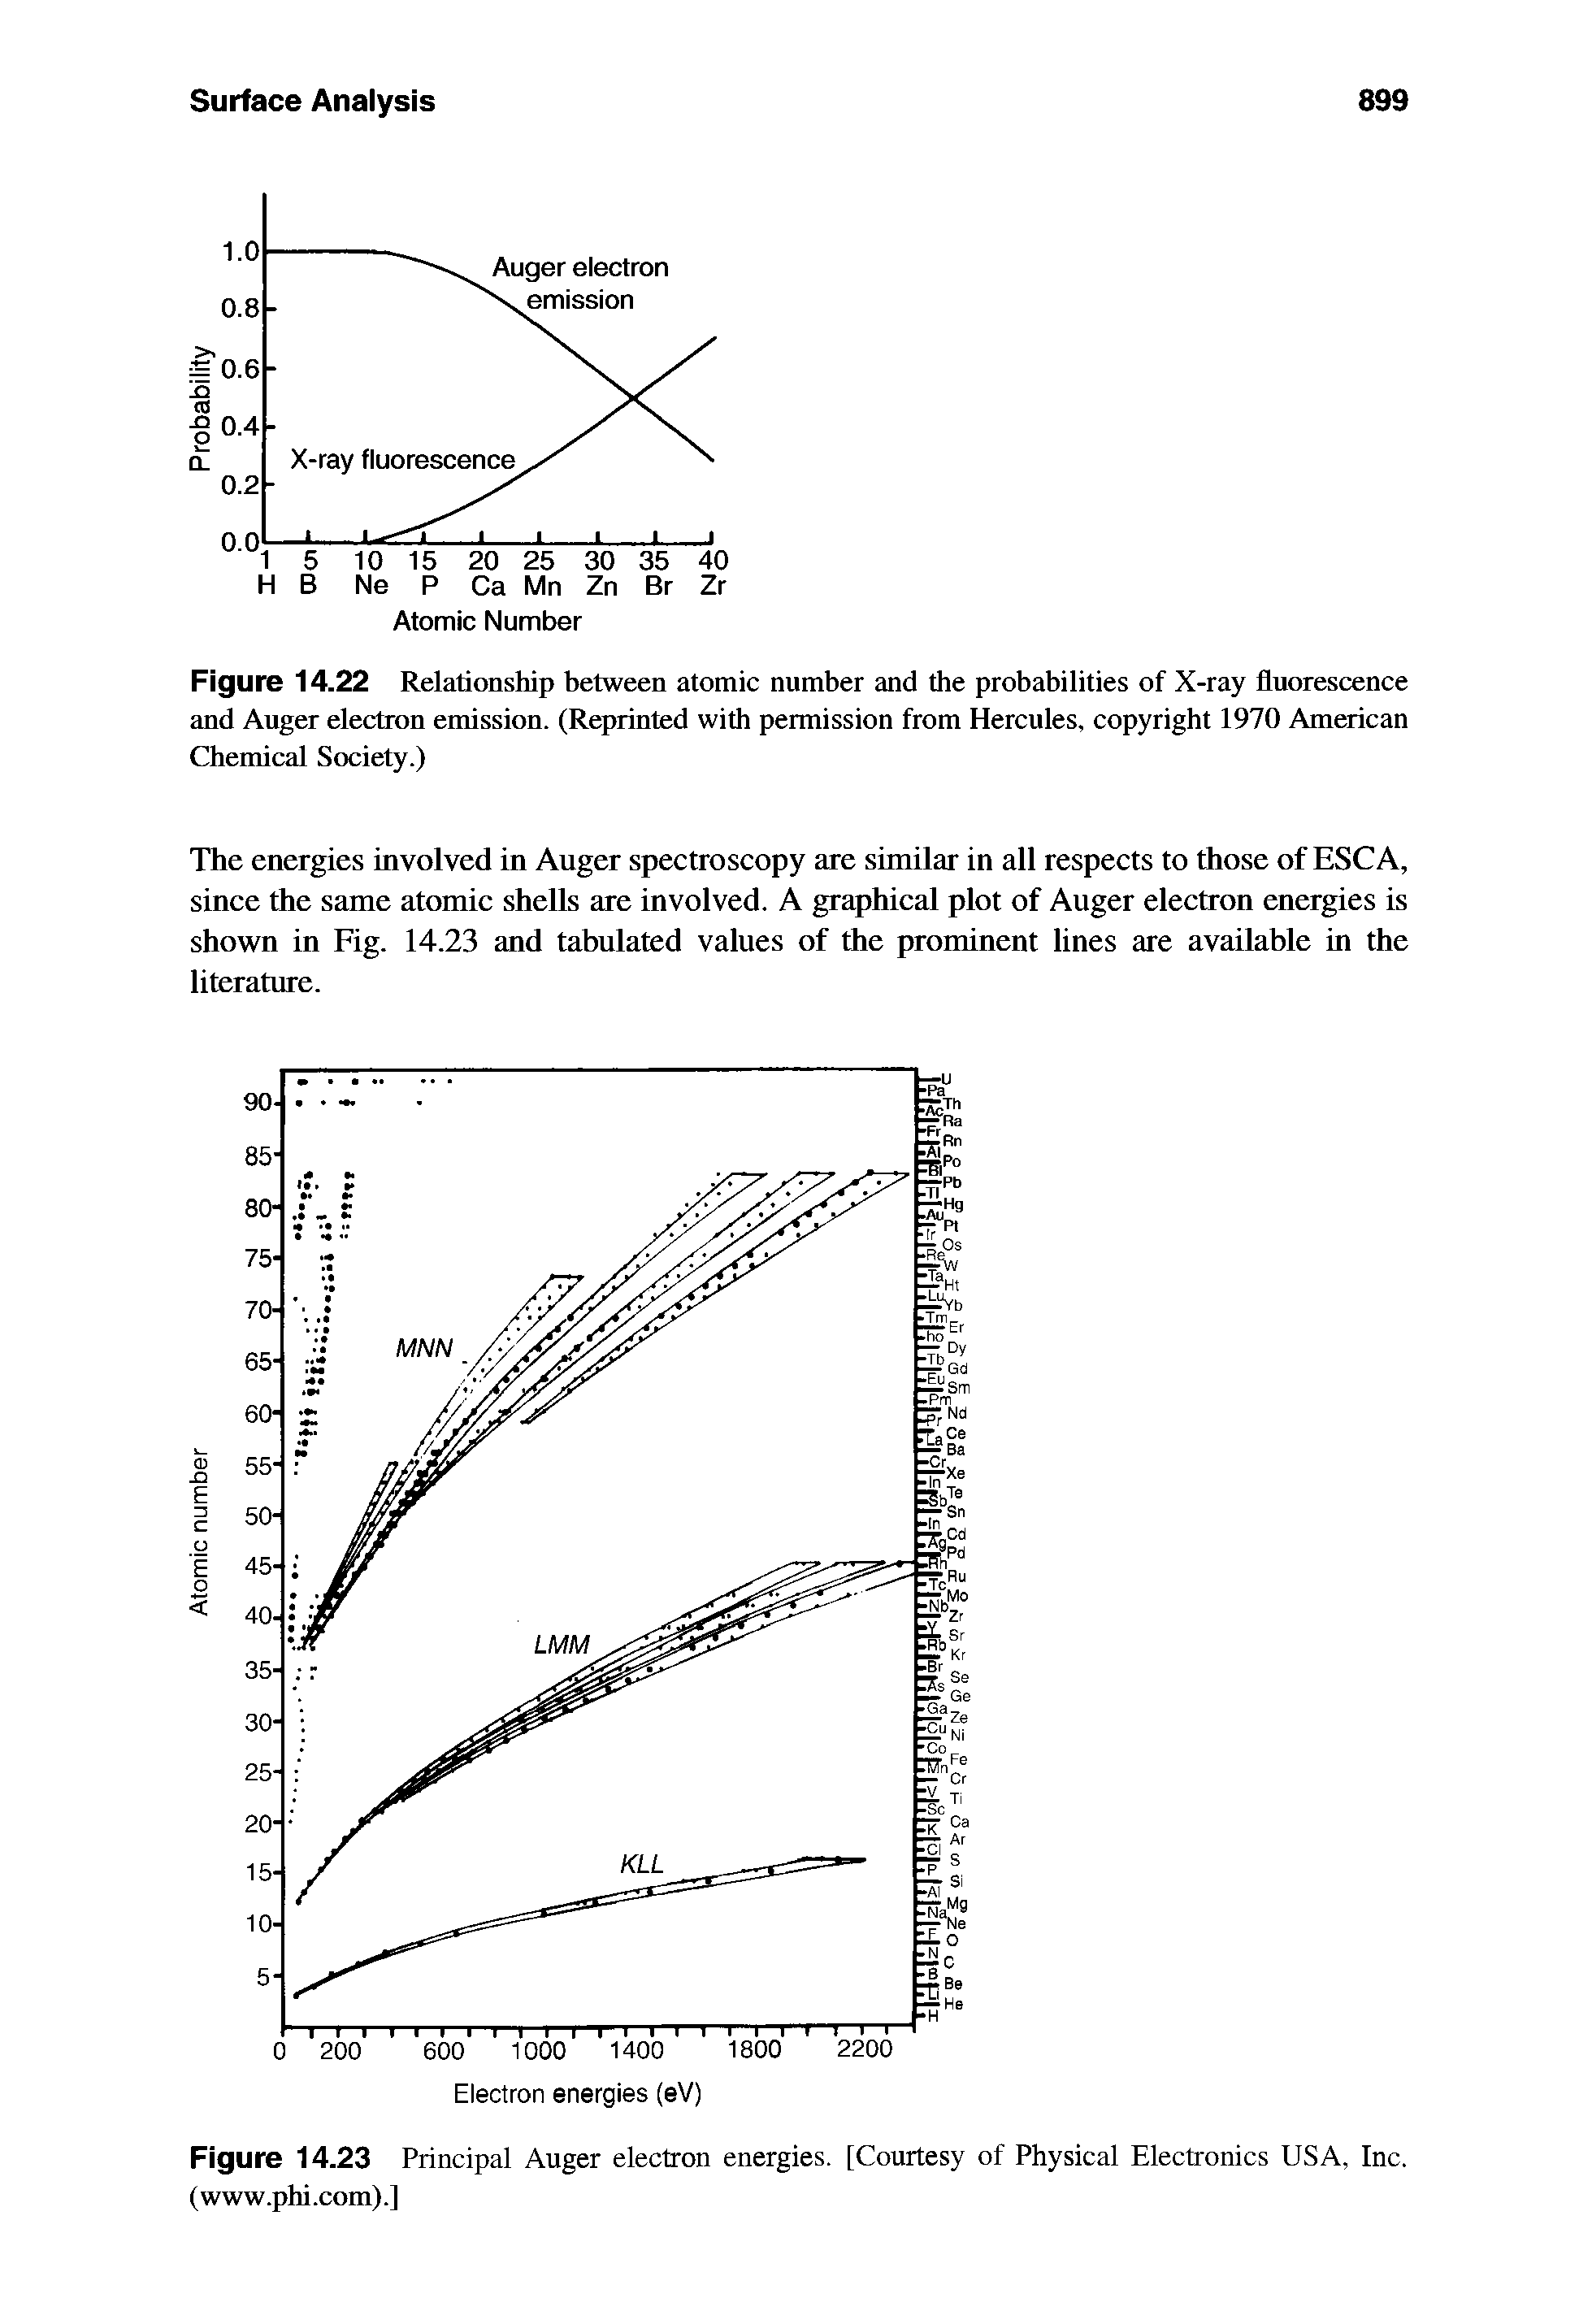 Figure 14.22 Relationship between atomic number and the probabilities of X-ray fluorescence and Auger electron emission. (Reprinted with permission from Hercules, copyright 1970 American Chemical Society.)...